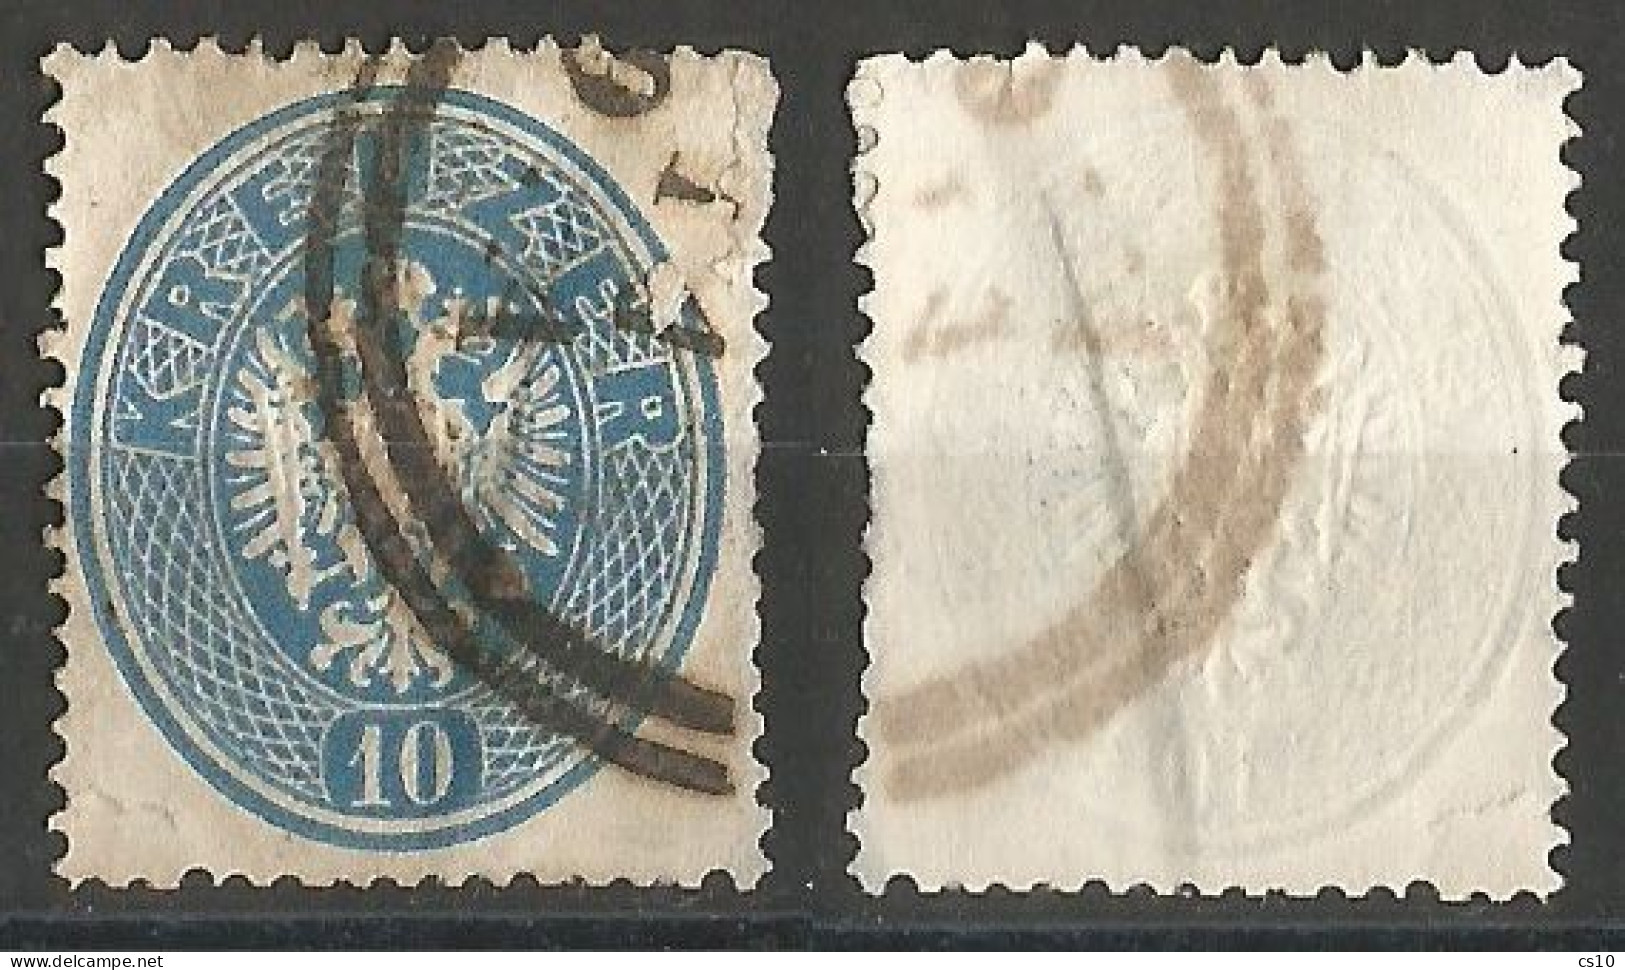 AUSTRIA EMPIRE selection Mint/Used stamps with Older, Fragments, Variety, PMKs, etc  Front/back scan - total 27 pcs